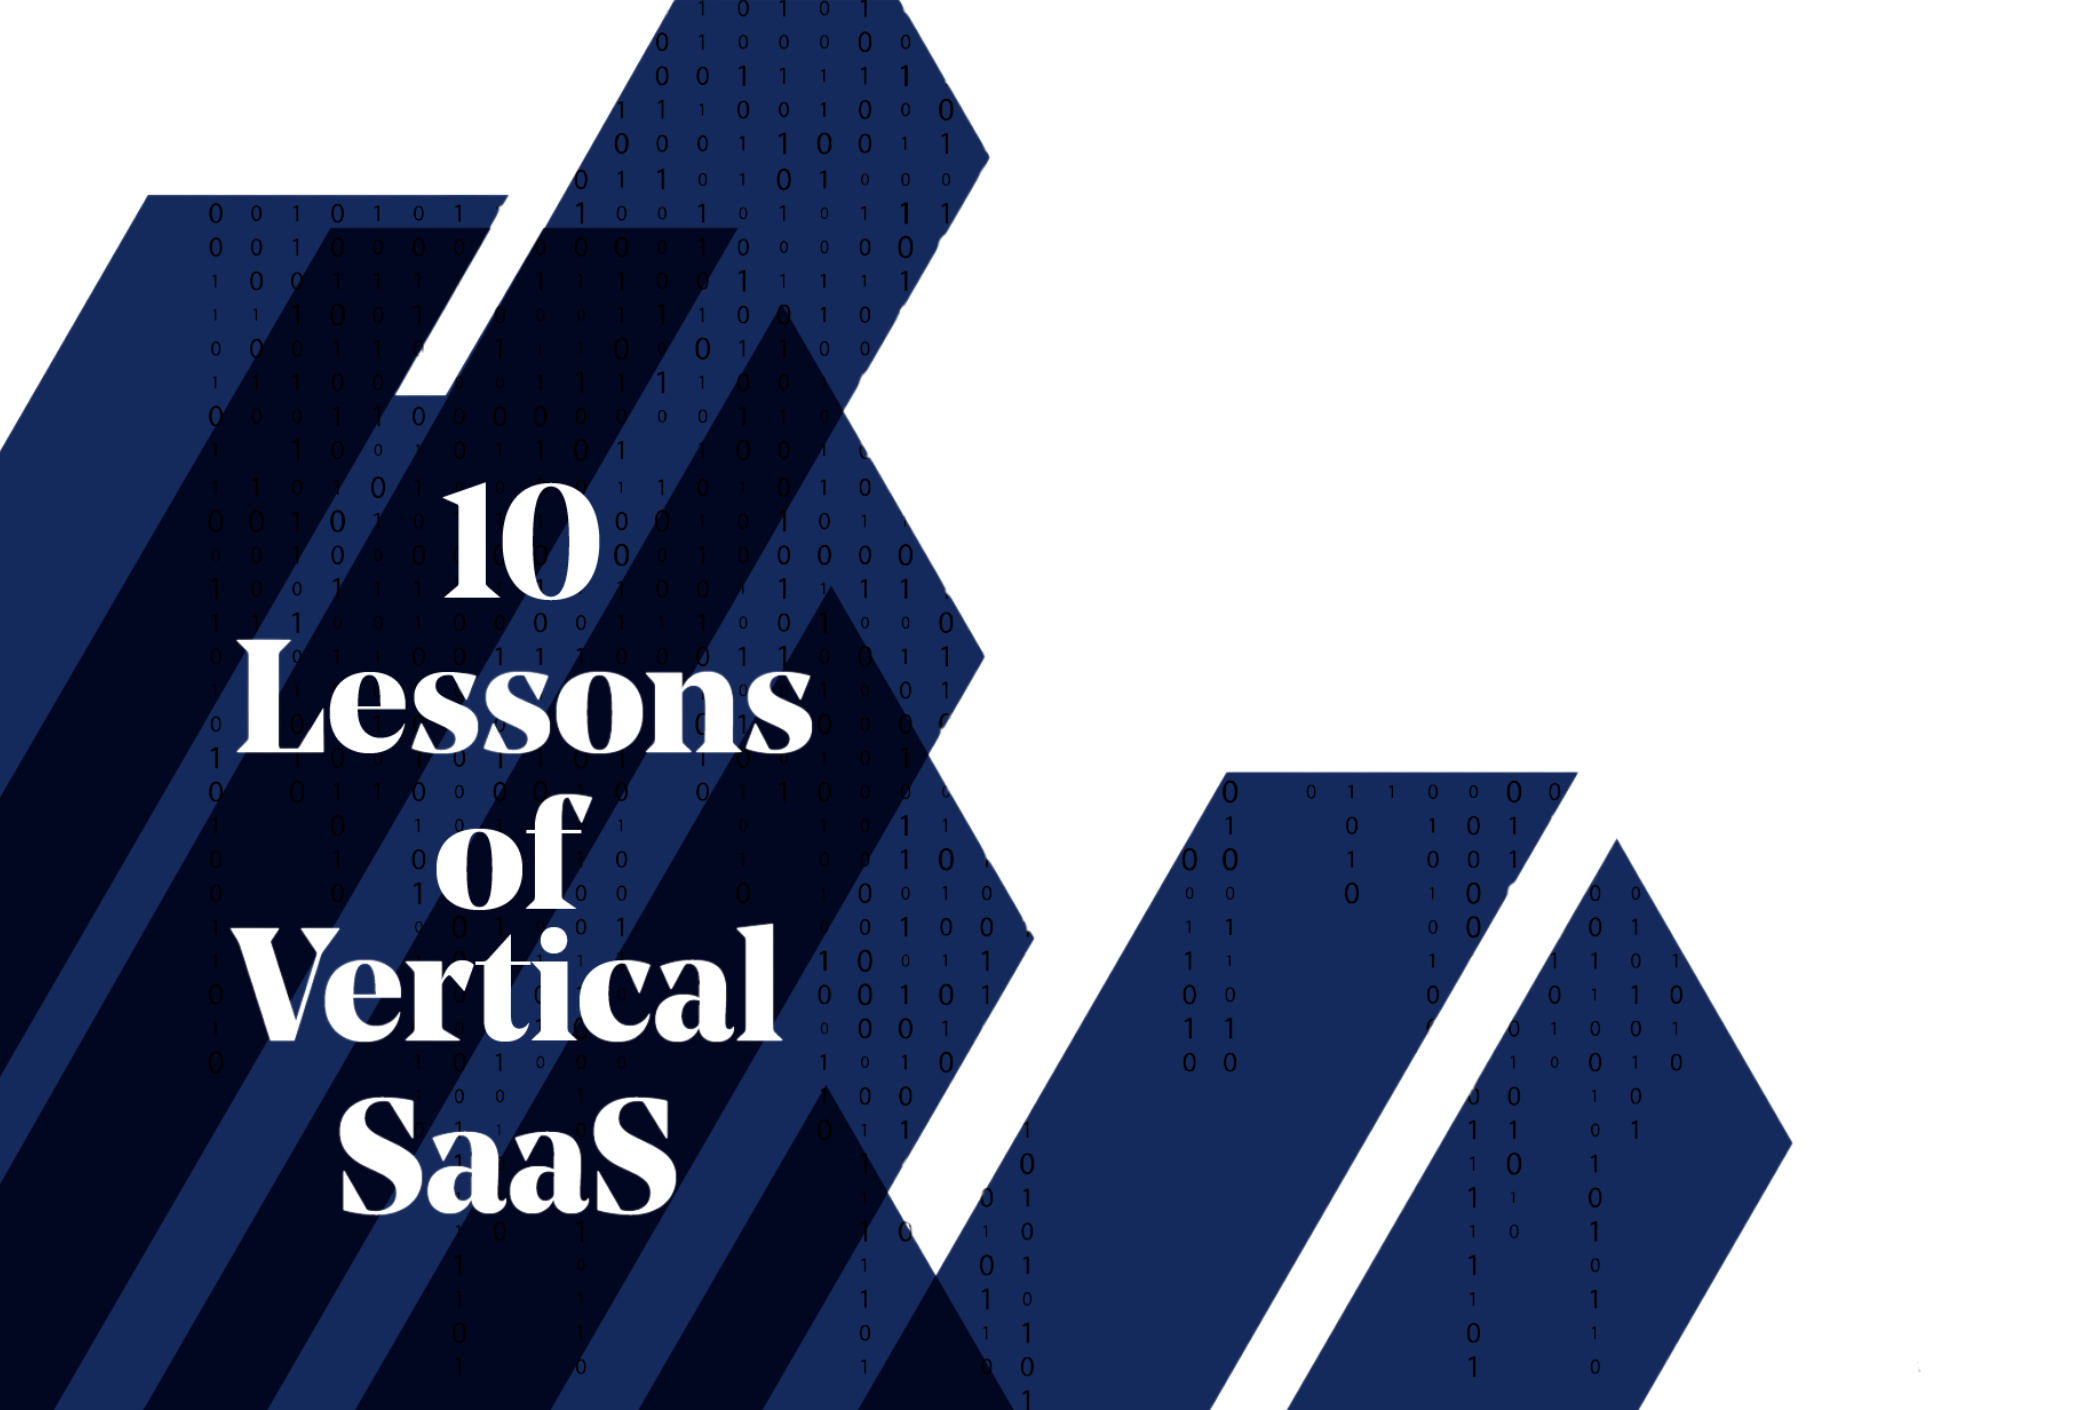 Ten lessons vertical saas finalized image netlify